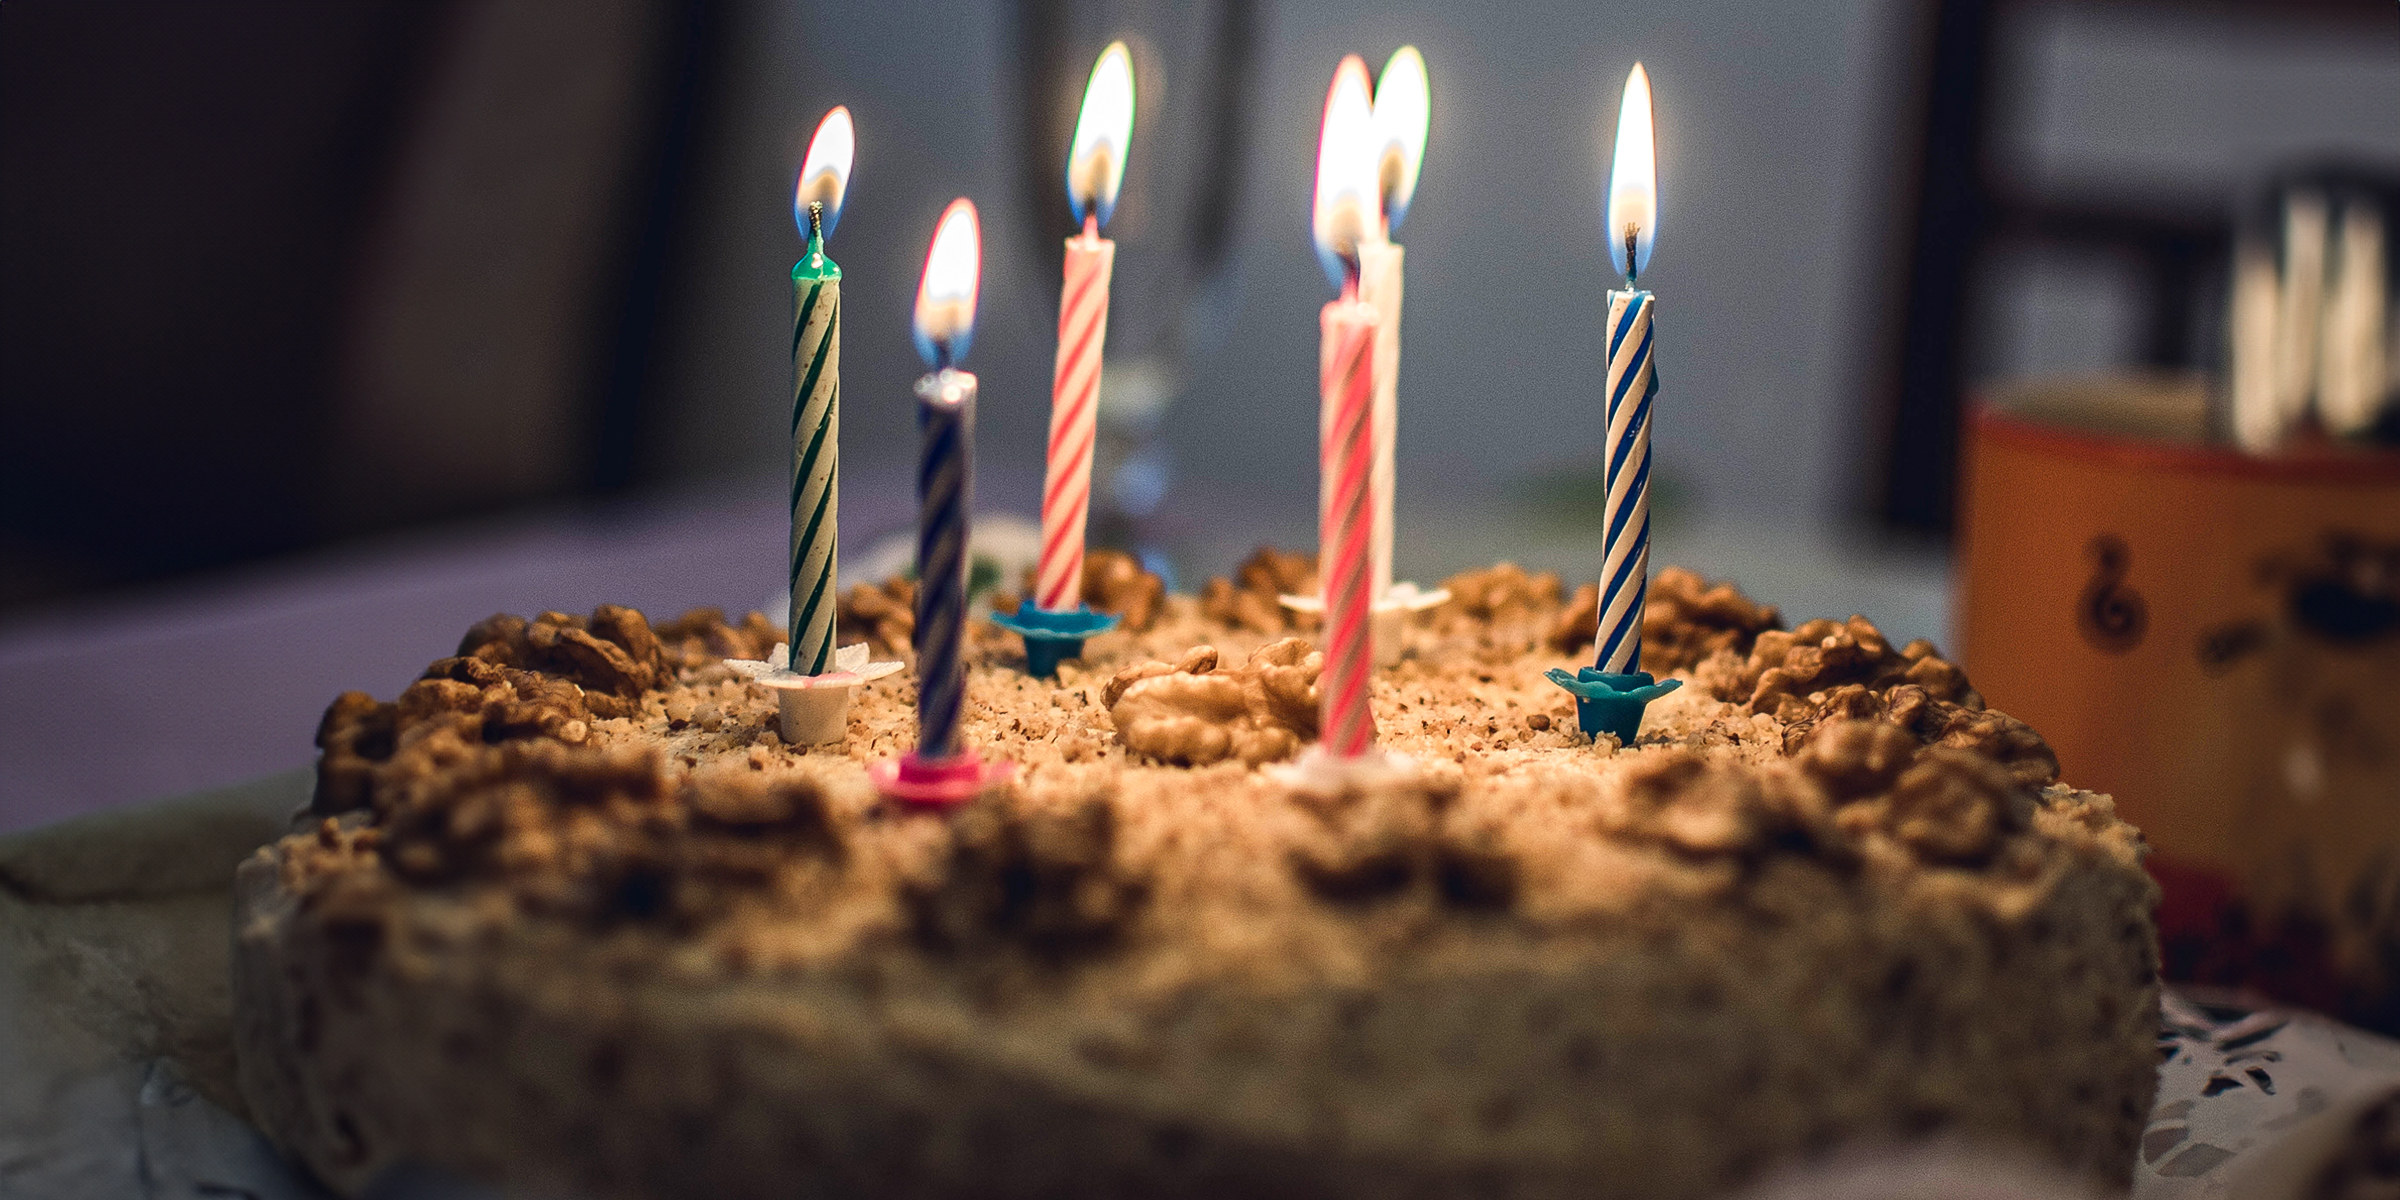 A birthday cake with candles | Source: Shutterstock